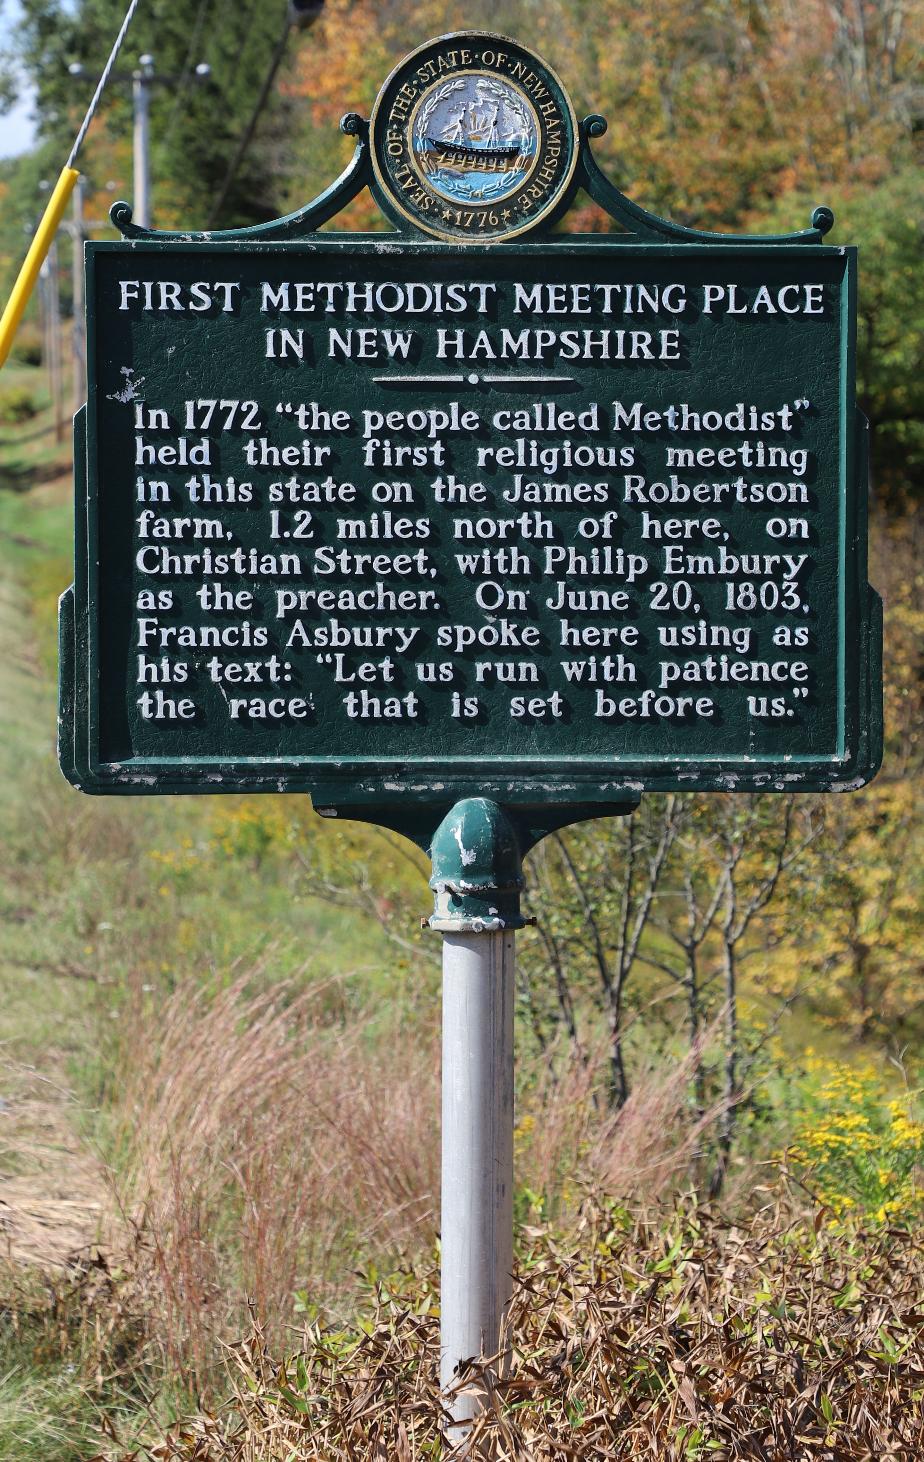 First Methodist Meeting Place Historical Marker #60 Chesterfield New Hampshire